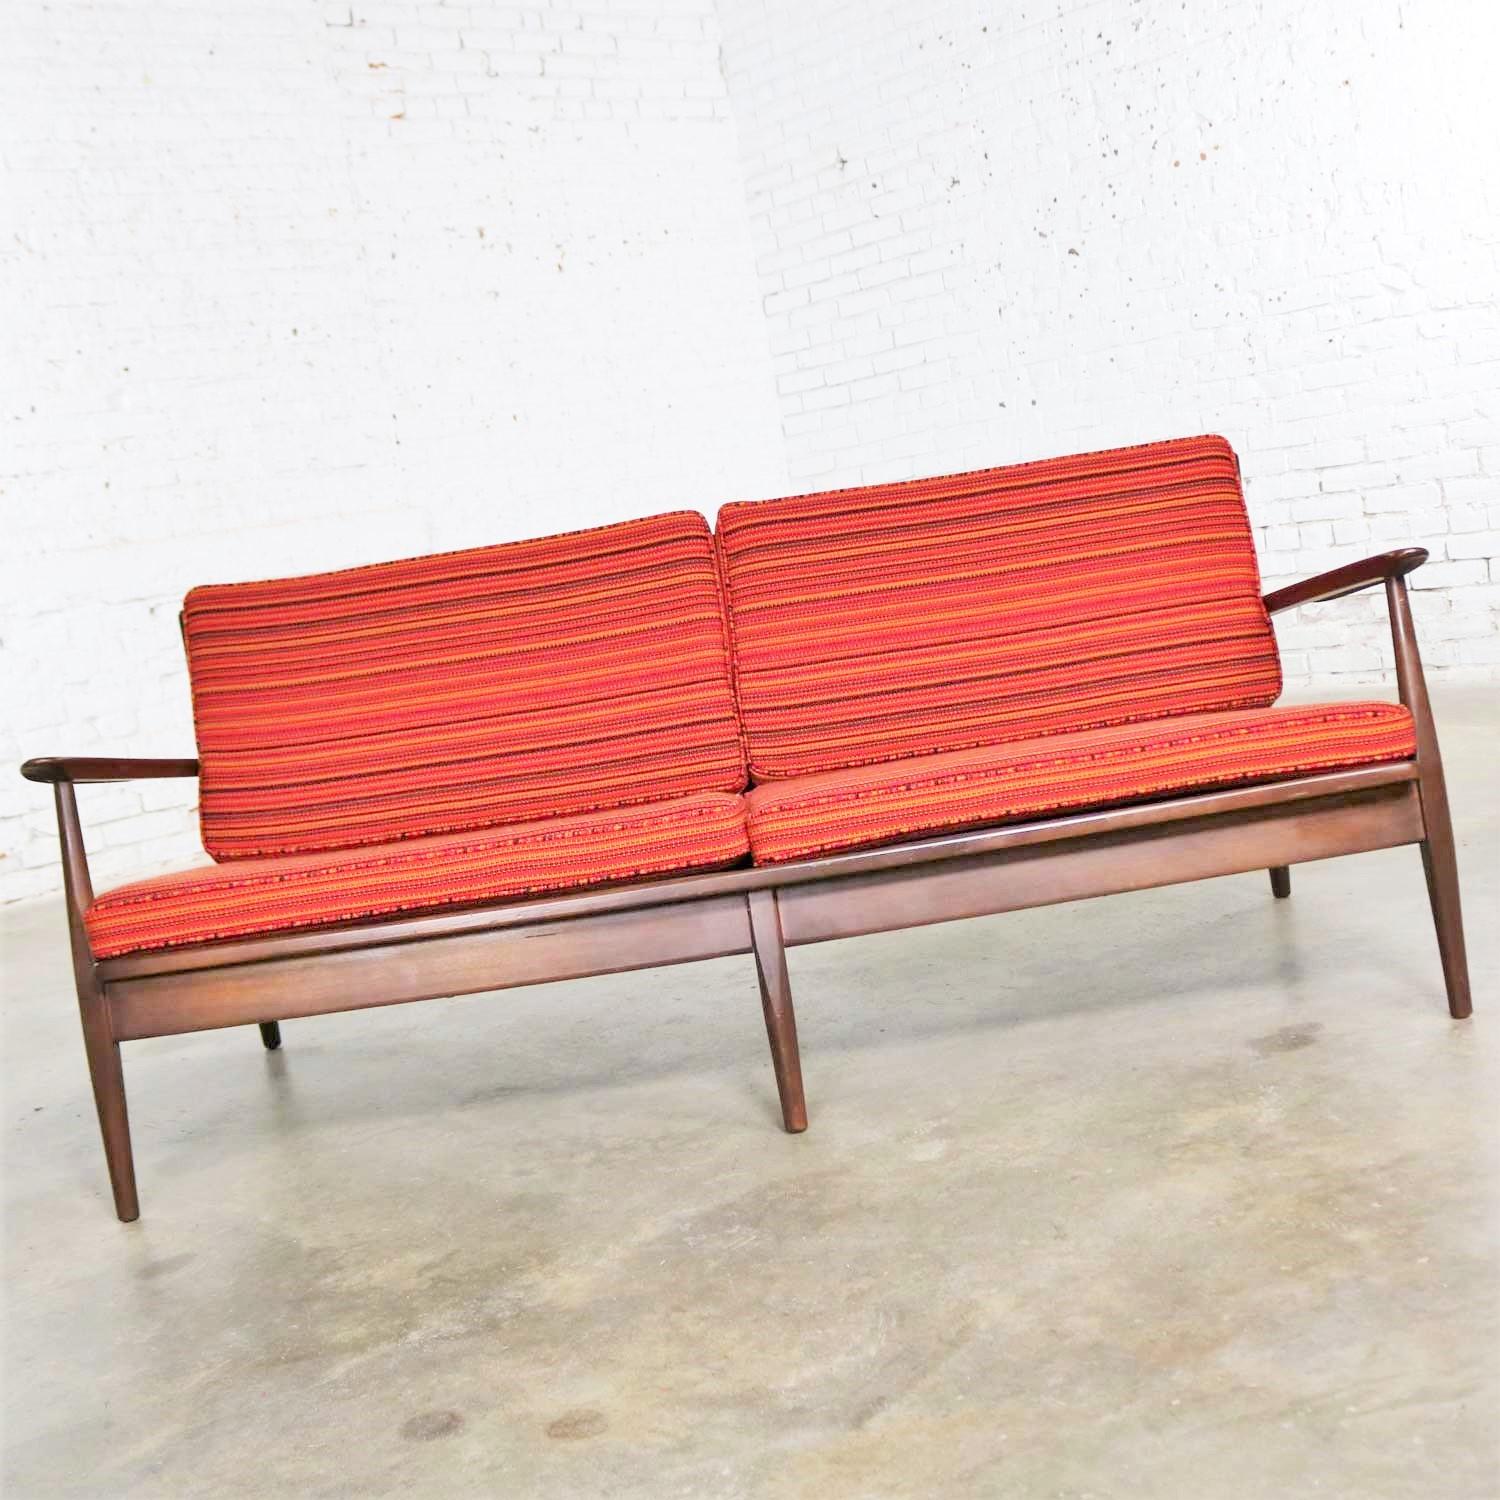 Handsome vintage Danish modern or Scandinavian Modern loose cushion sofa with new but vintage old stock red, golden, and dark brown horizontal striped fabric. This sofa is in overall fabulous condition. The wood frame is in original vintage